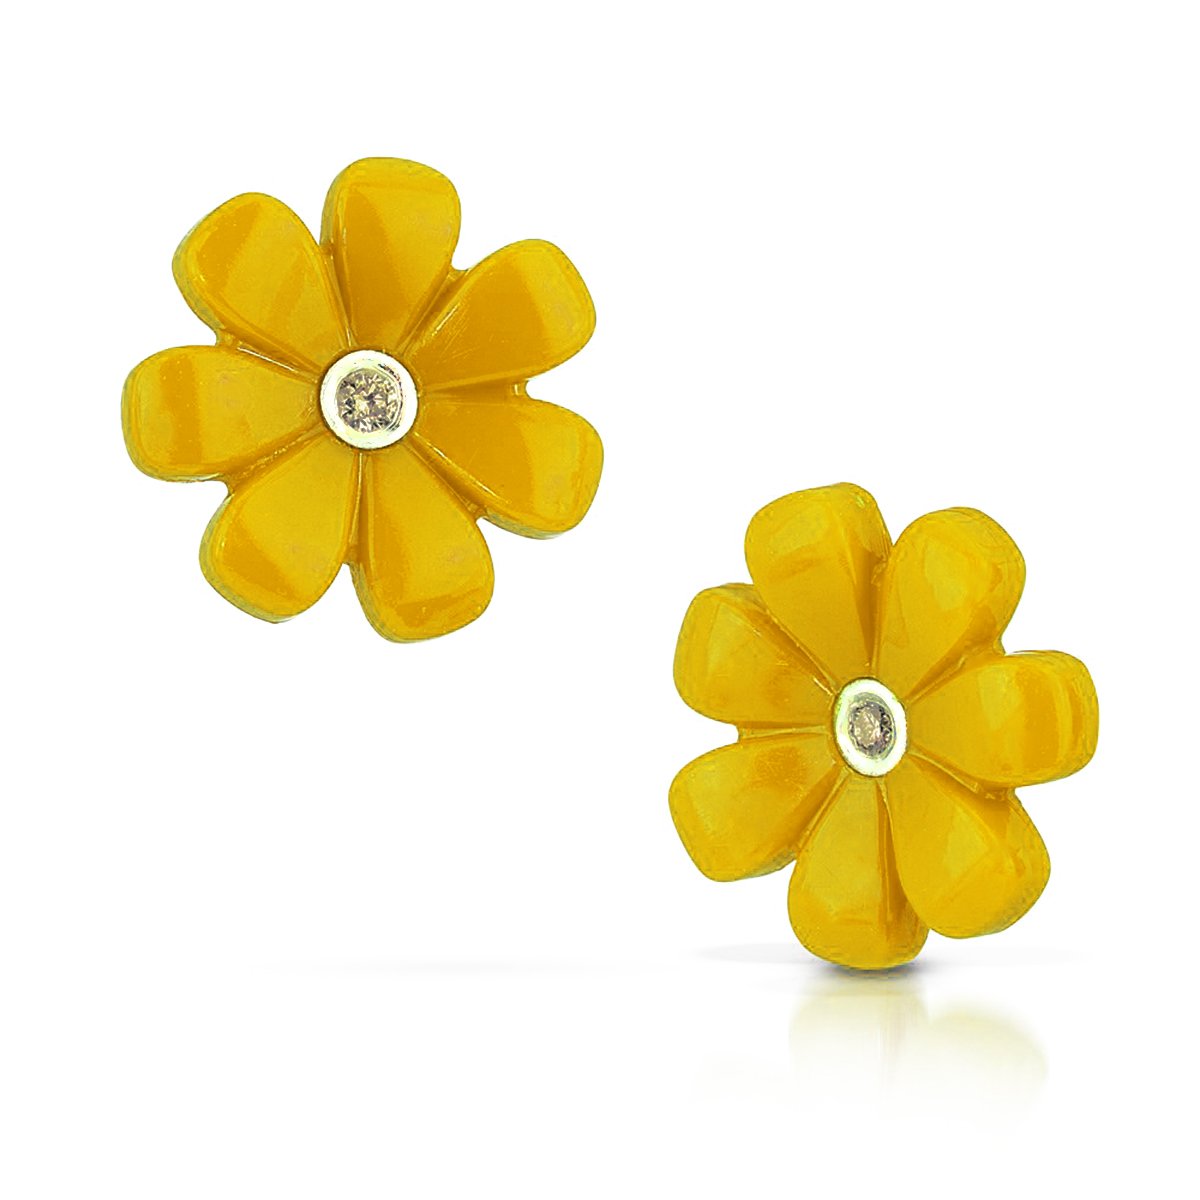 LEGO friends yellow flower earrings with colored yellow diamonds in 18kt yellow gold 